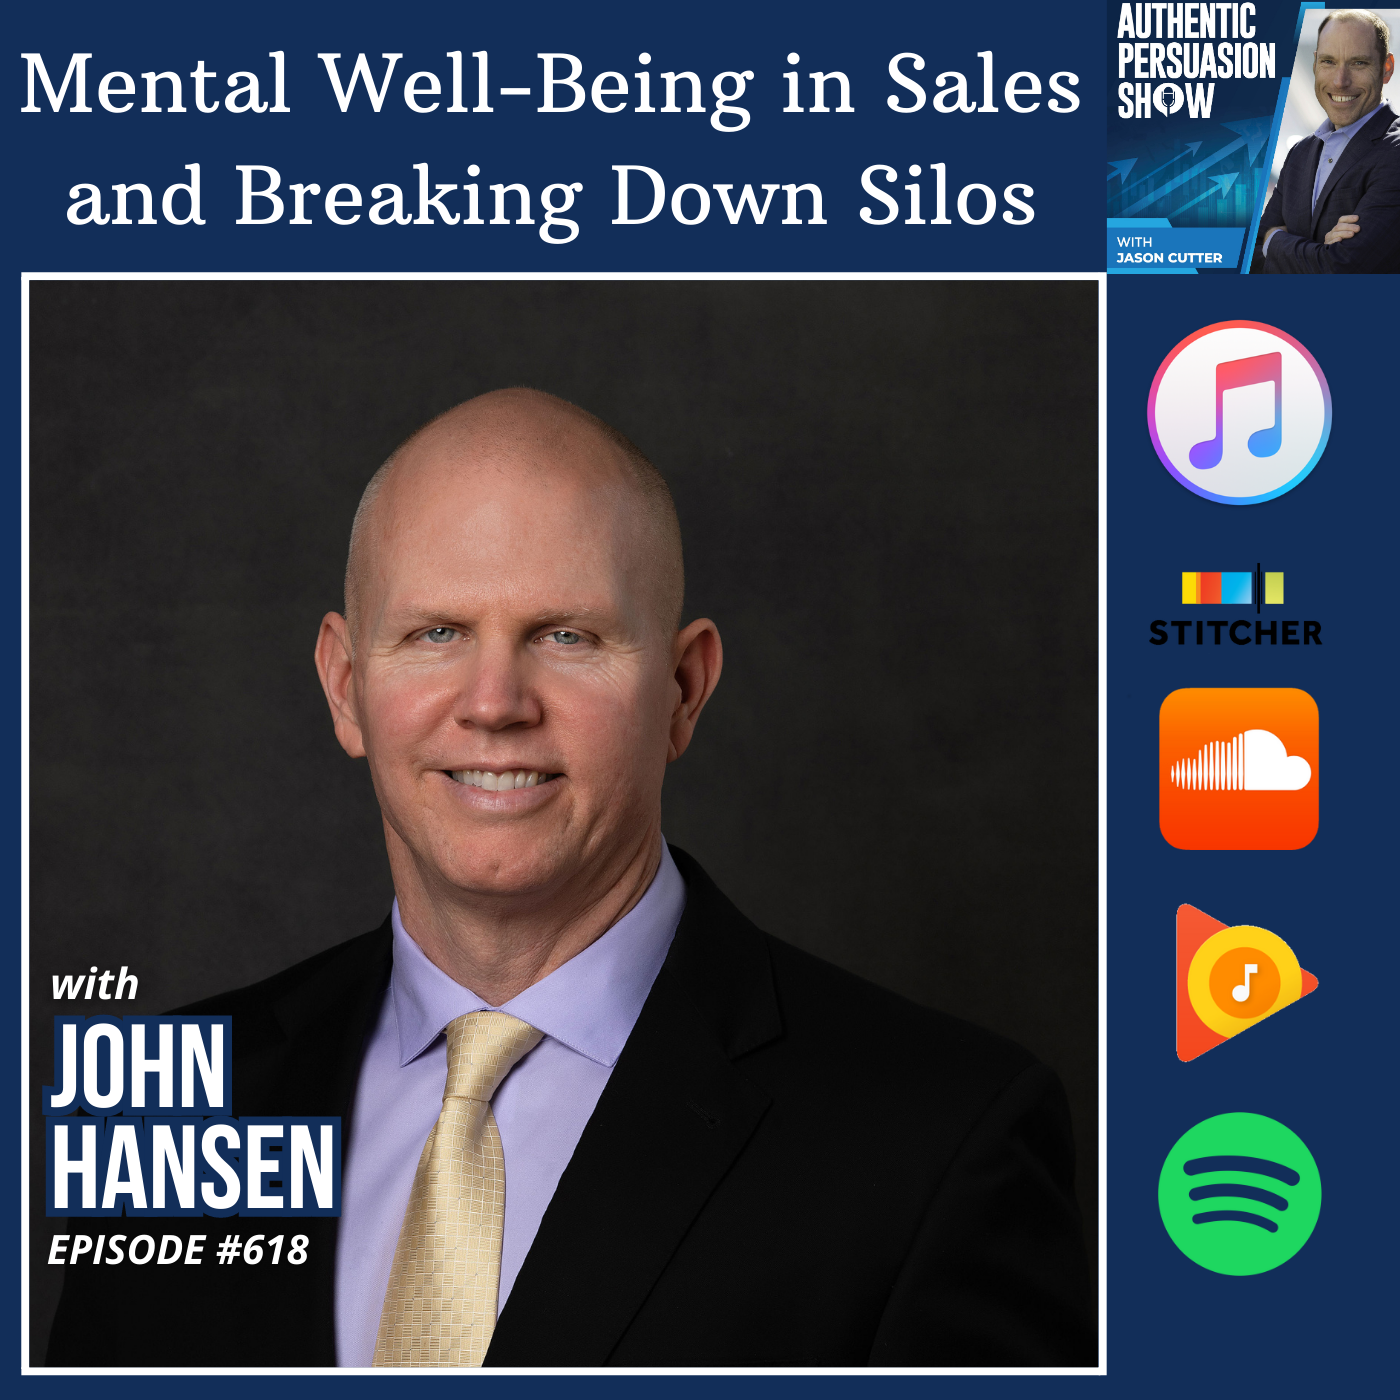 [618] Mental Well Being in Sales and Breaking Down Silos, with Dr. John Hansen from the University of Alabama, Birmingham